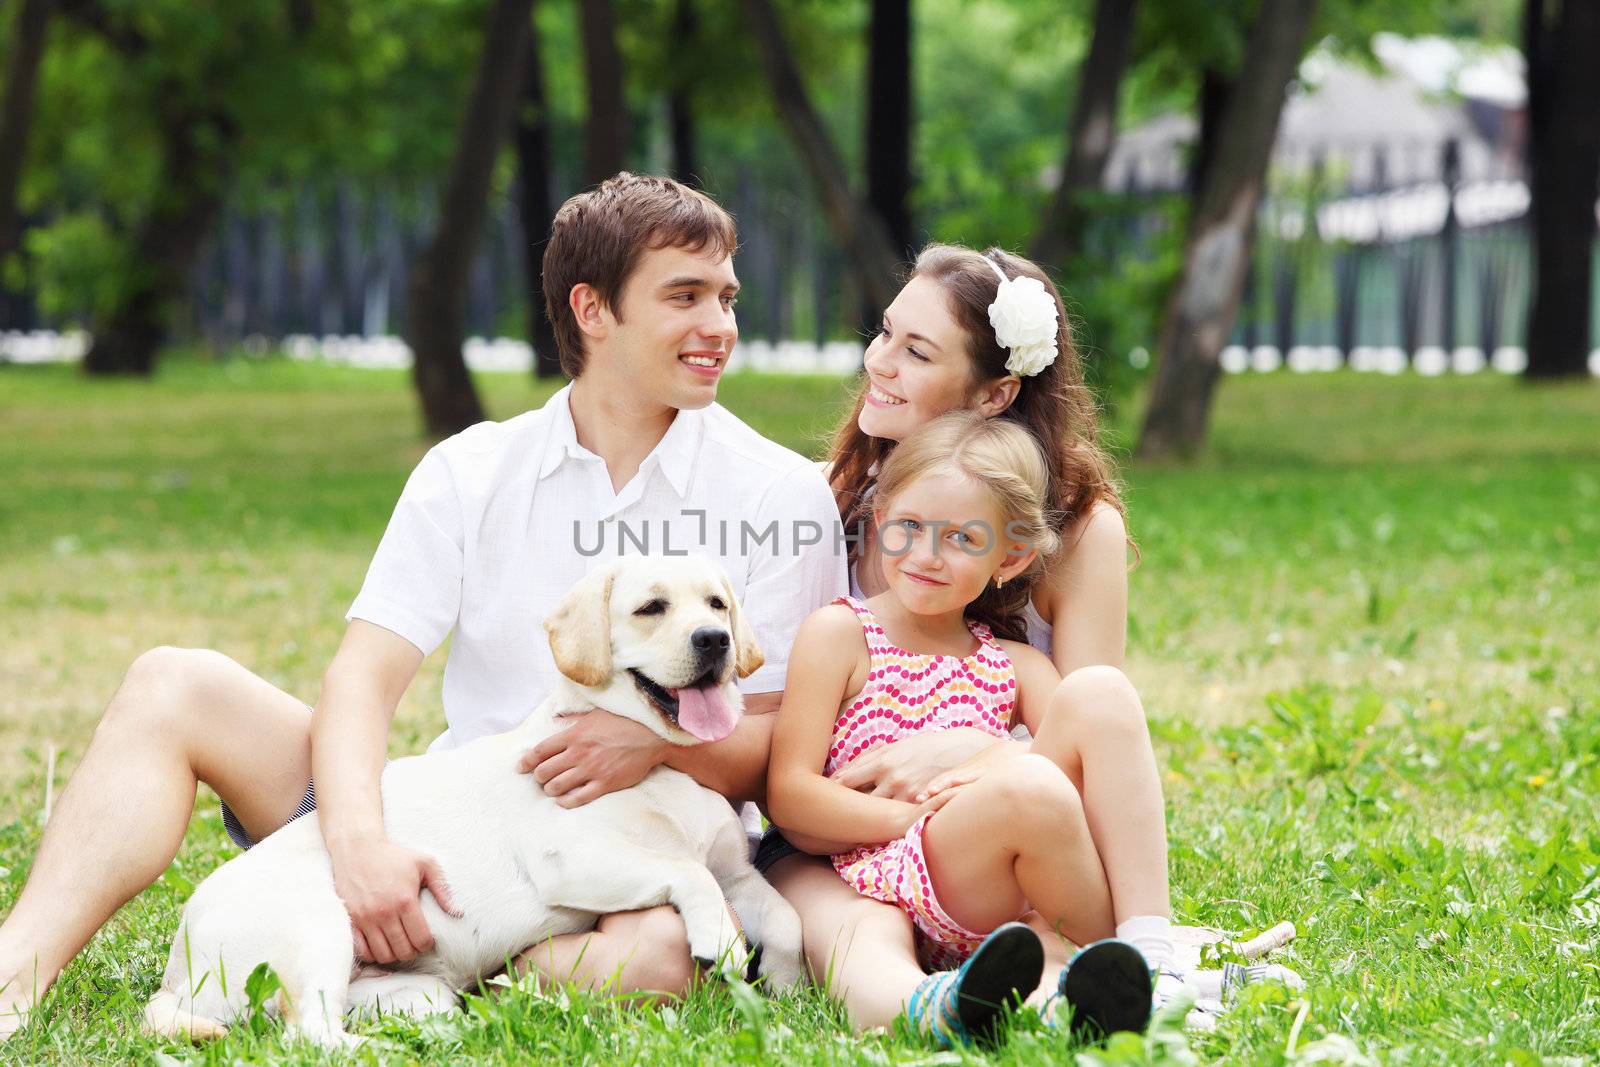 Young Family Outdoors in summer park with a dog